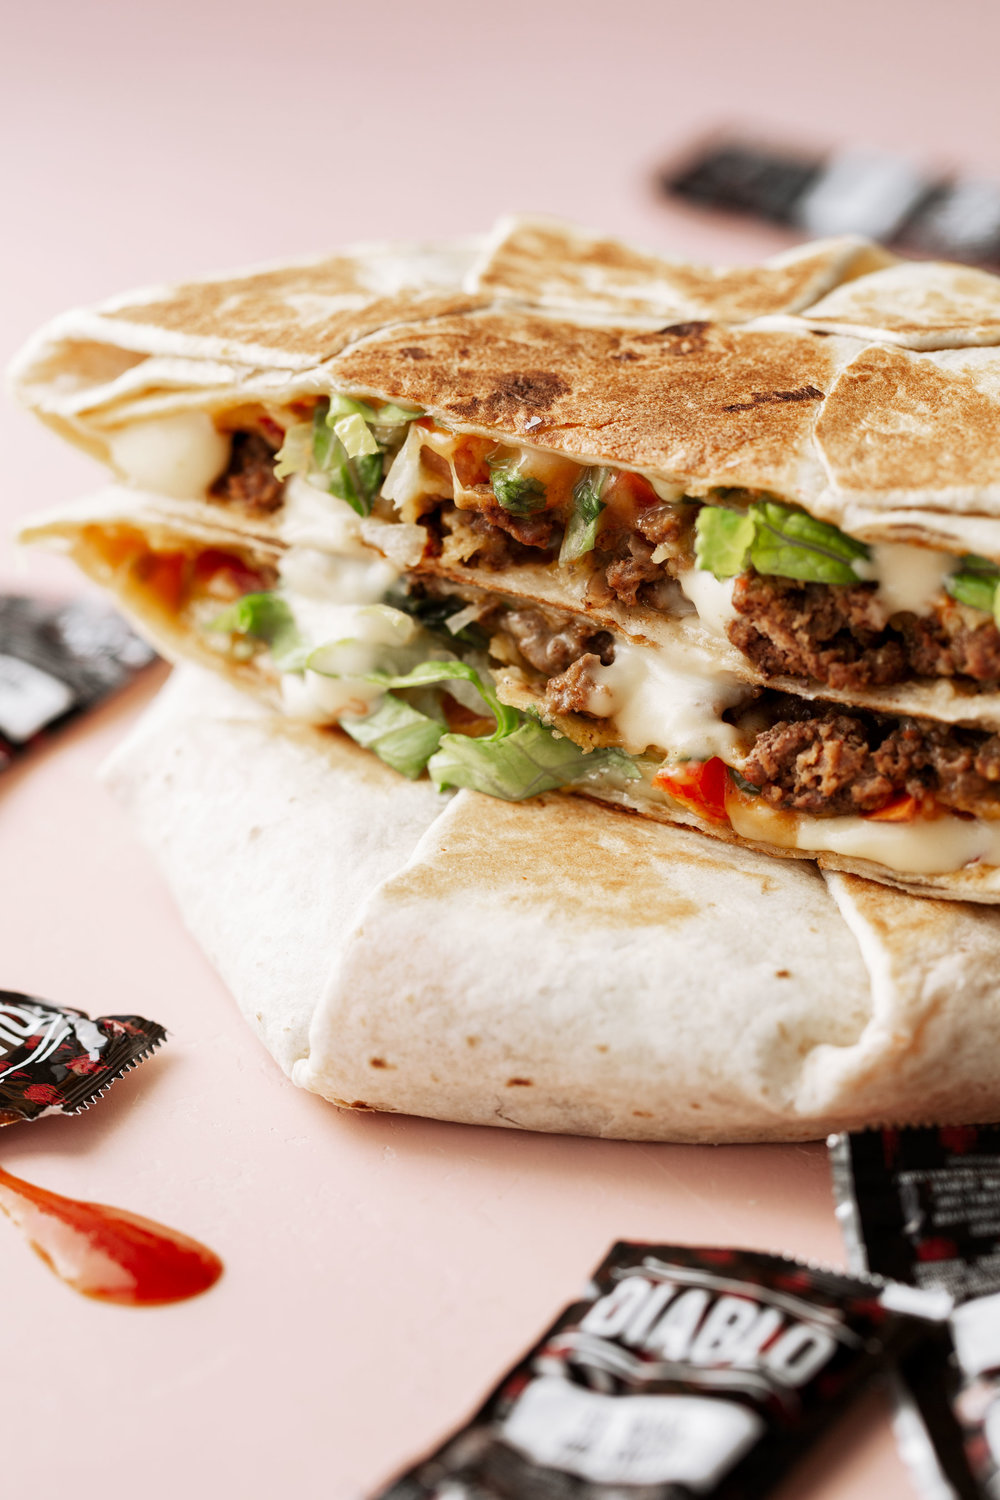 homemade crunch wrap supreme recipe stacked layers of tortillas, spiced ground beef, cheese sauce, lettuce and tomato